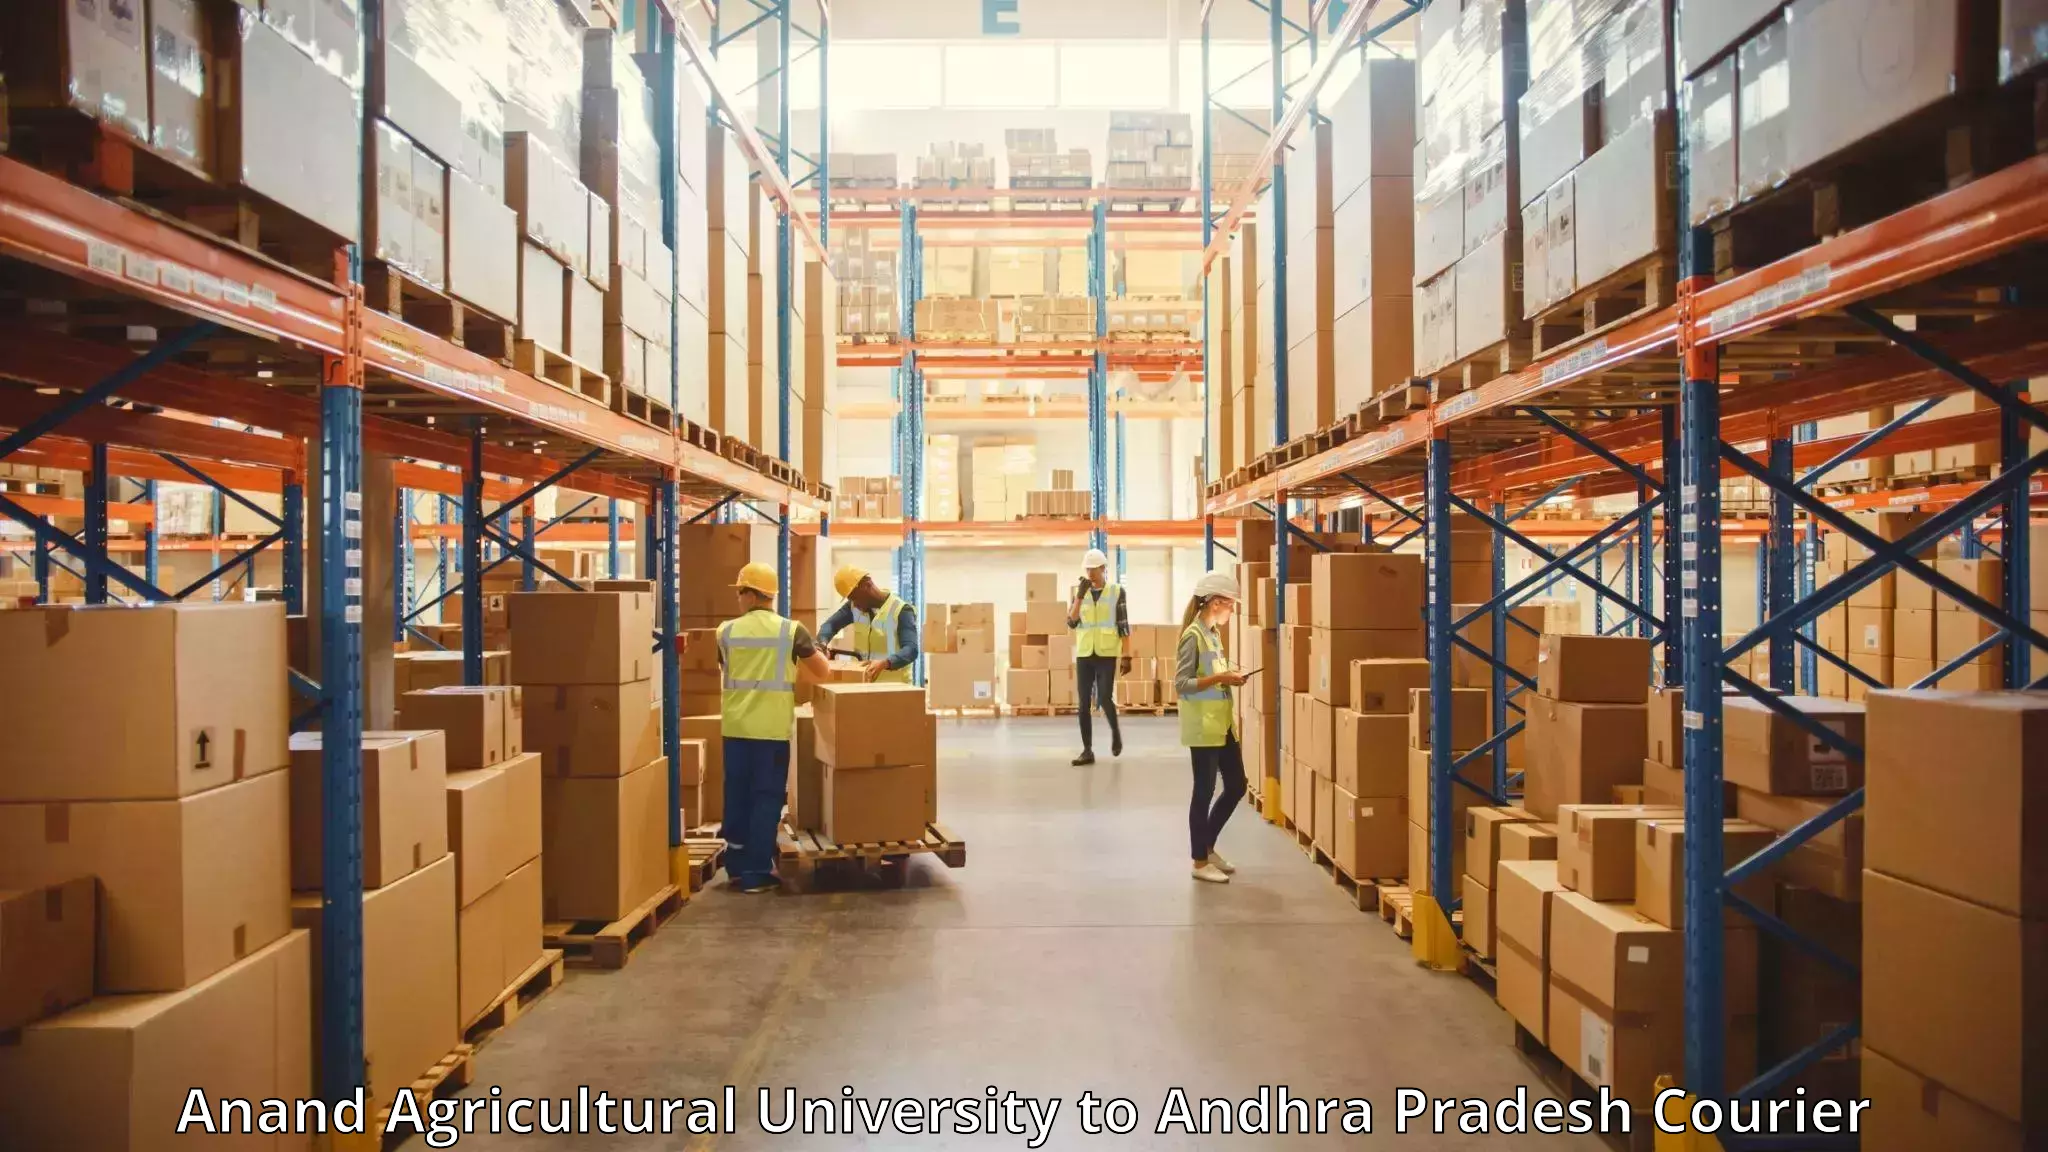 Luggage shipping service Anand Agricultural University to Dachepalle